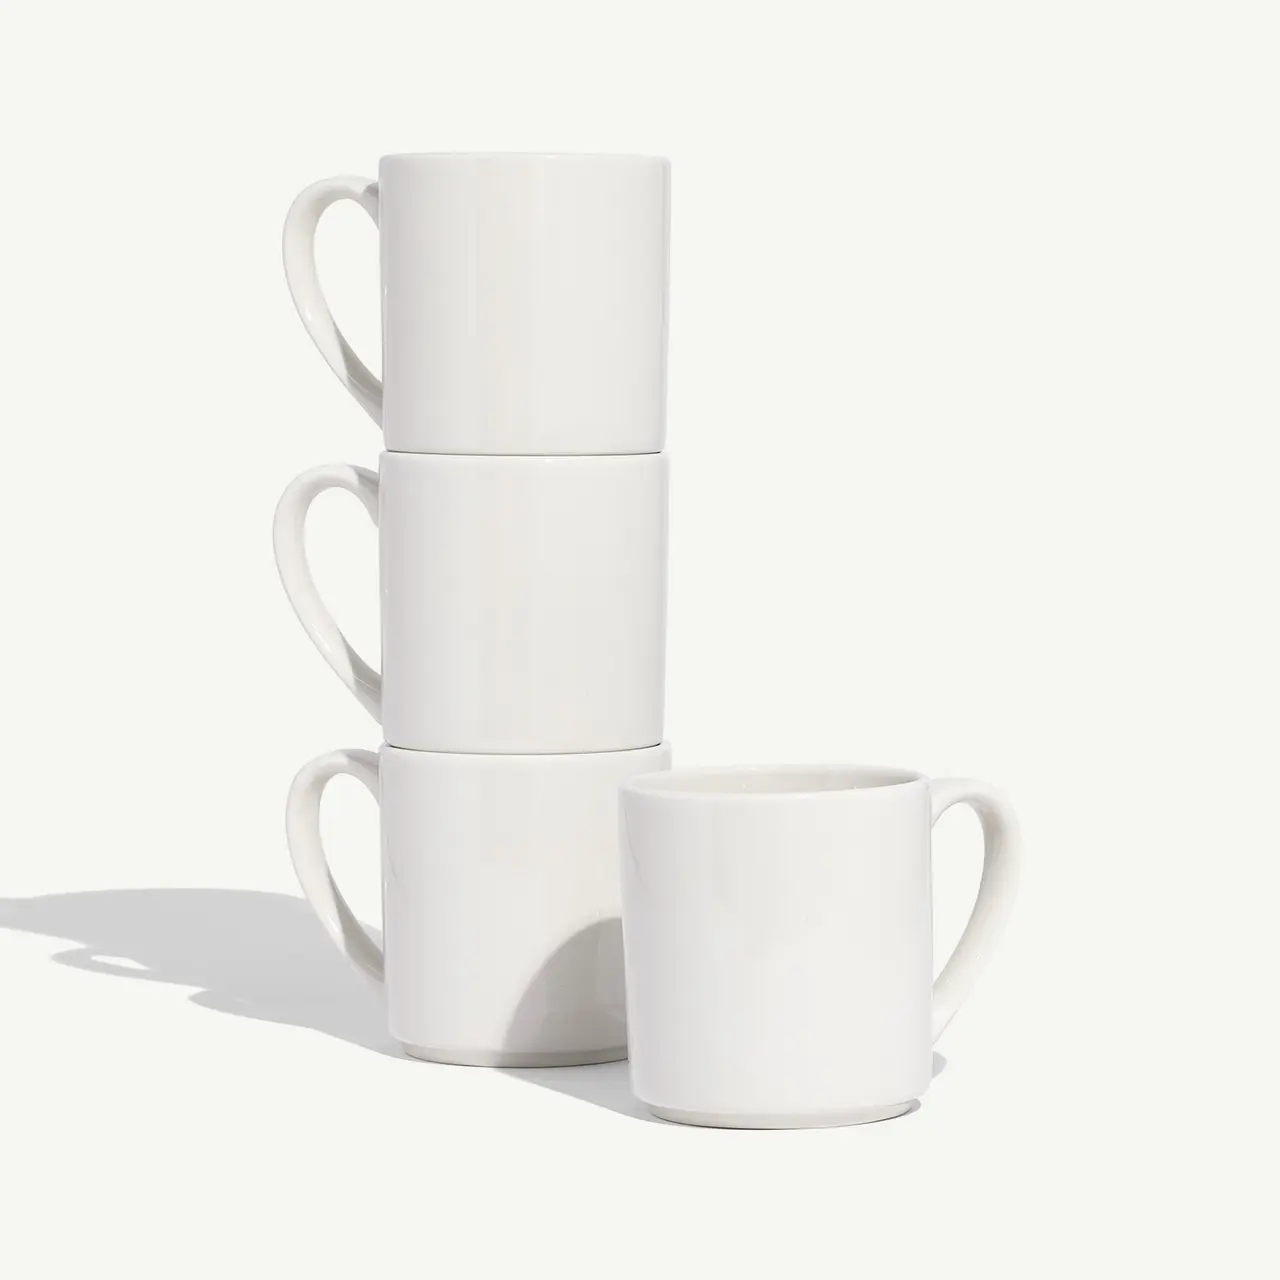 Three white coffee mugs are stacked on top of each other with one laying on its side in front on a plain background.